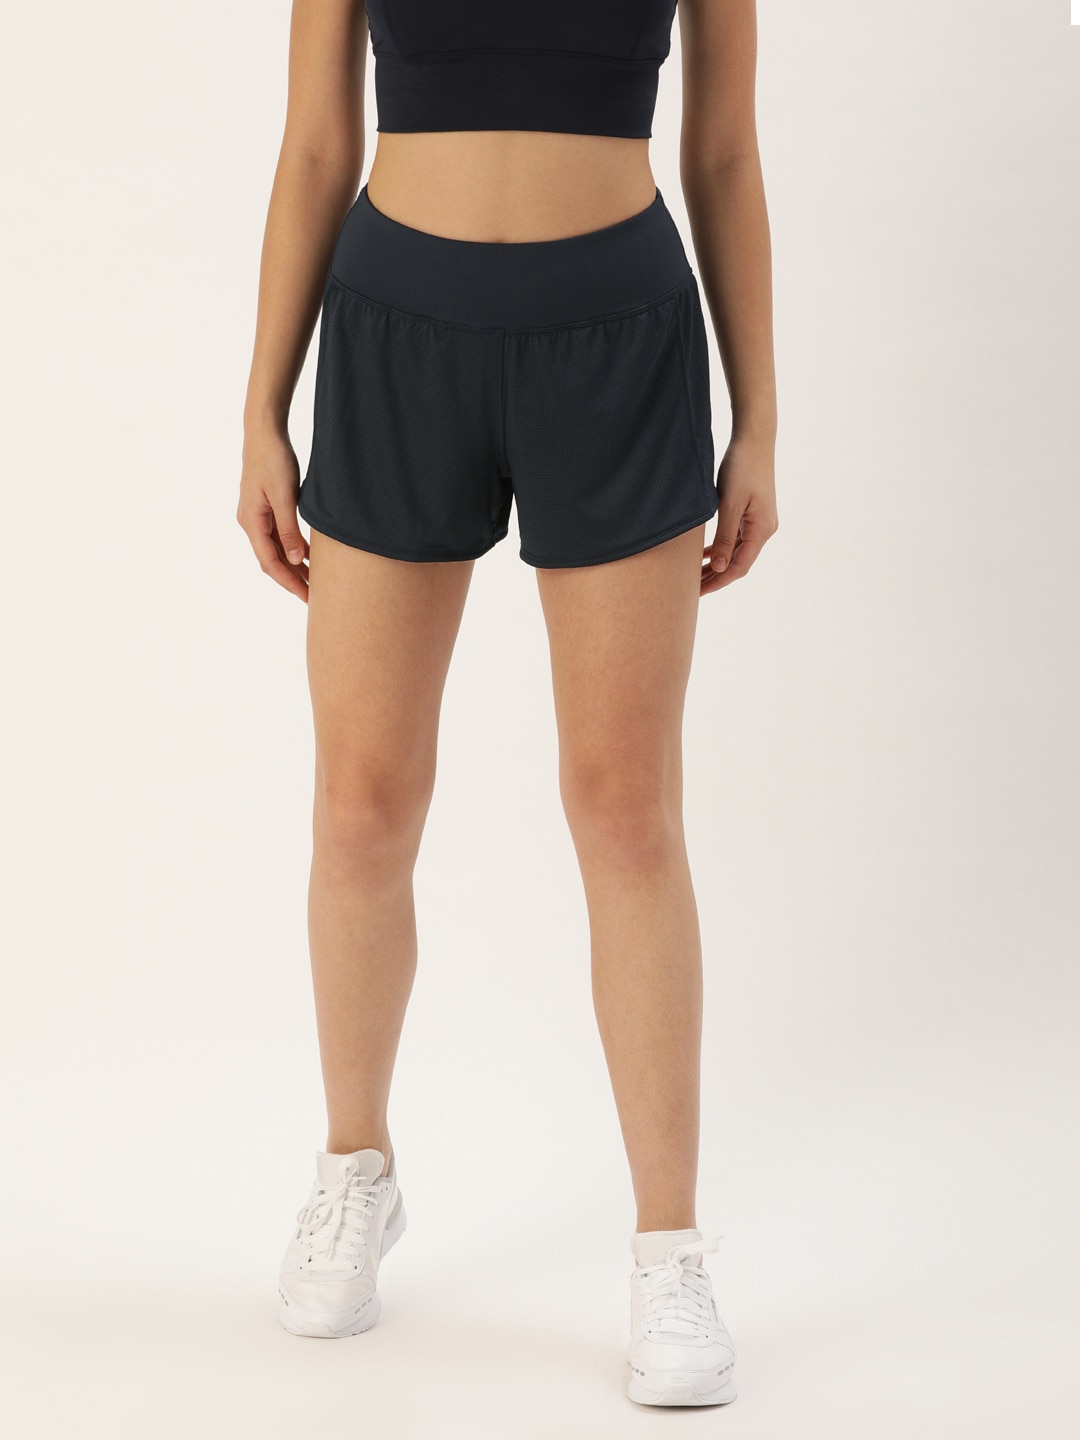 Enamor Women Athleisure Navy Blue Solid Dry-Fit Relaxed Fit Training Shorts Price in India